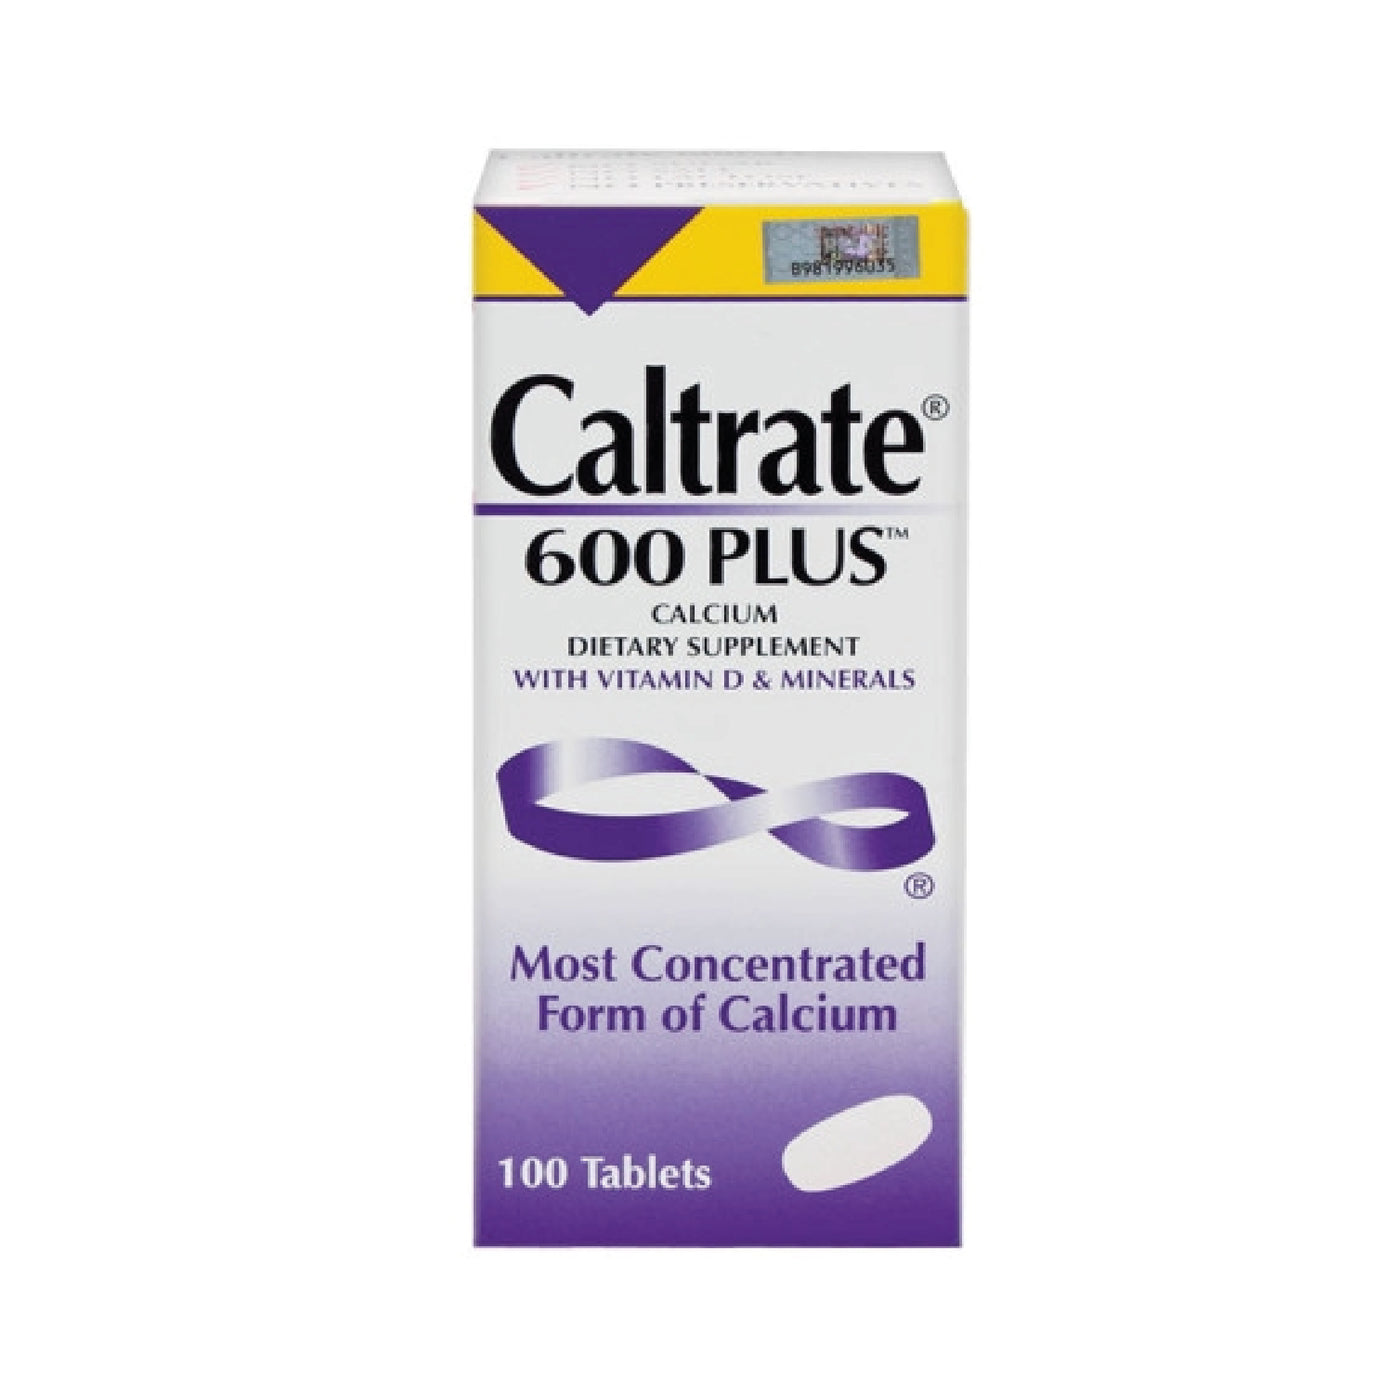 CALTRATE 600 PLUS TABLET 100's